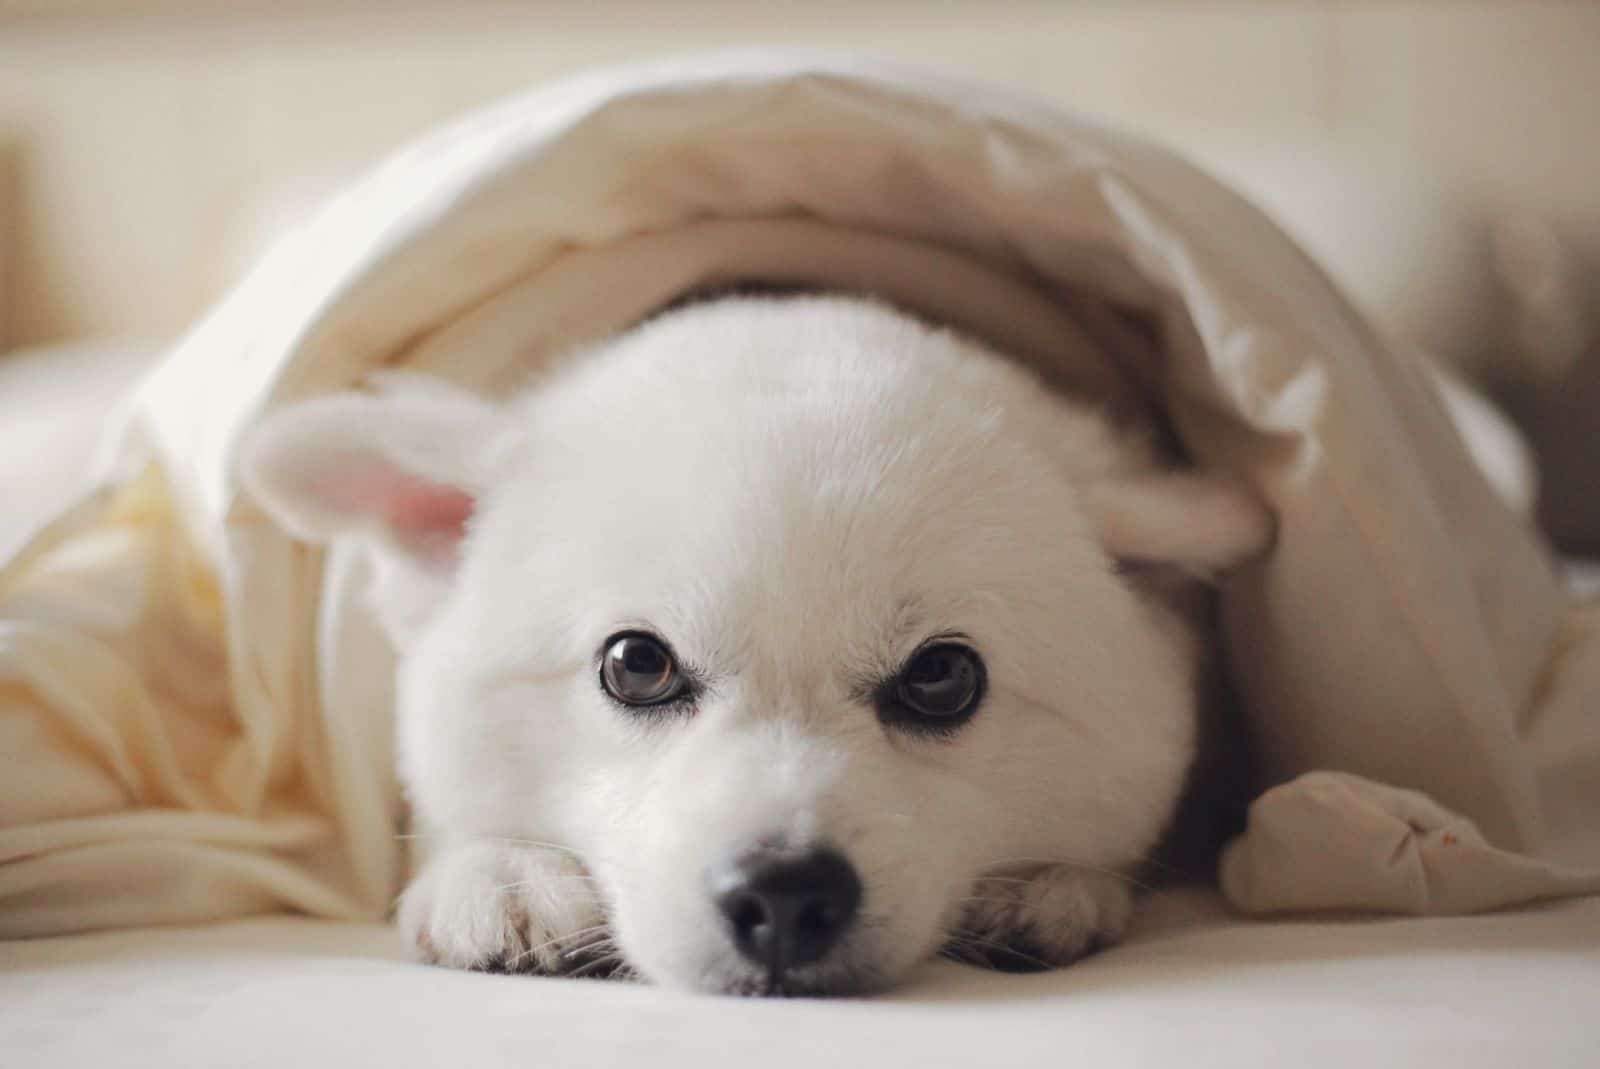 Why Does My Dog Sleep Under the Covers? 9 Reasons